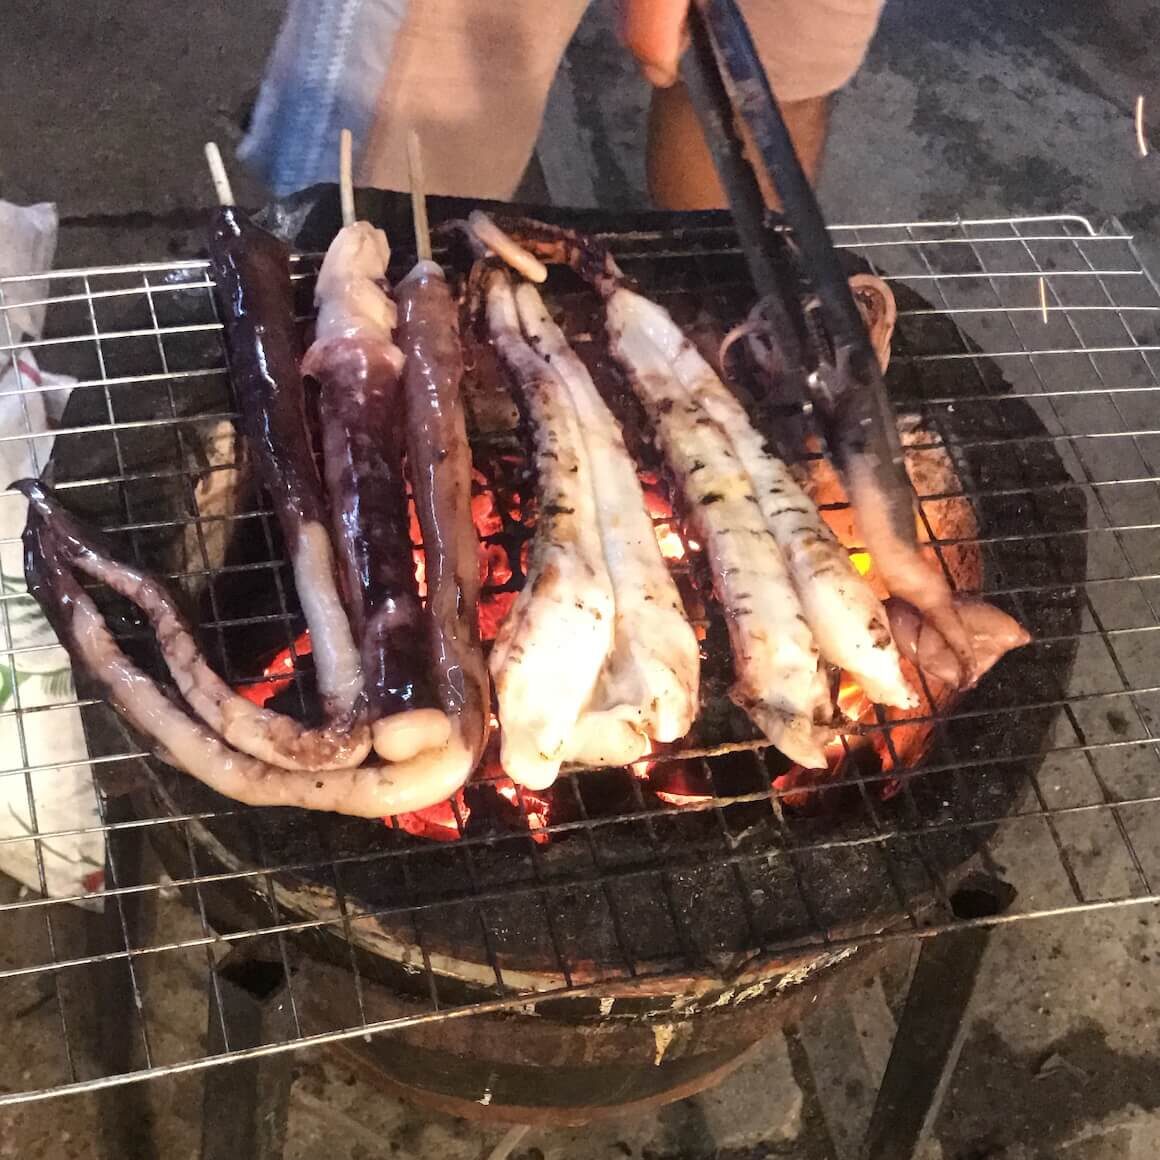 Octopus being fried on the street in Thailand (asian food)